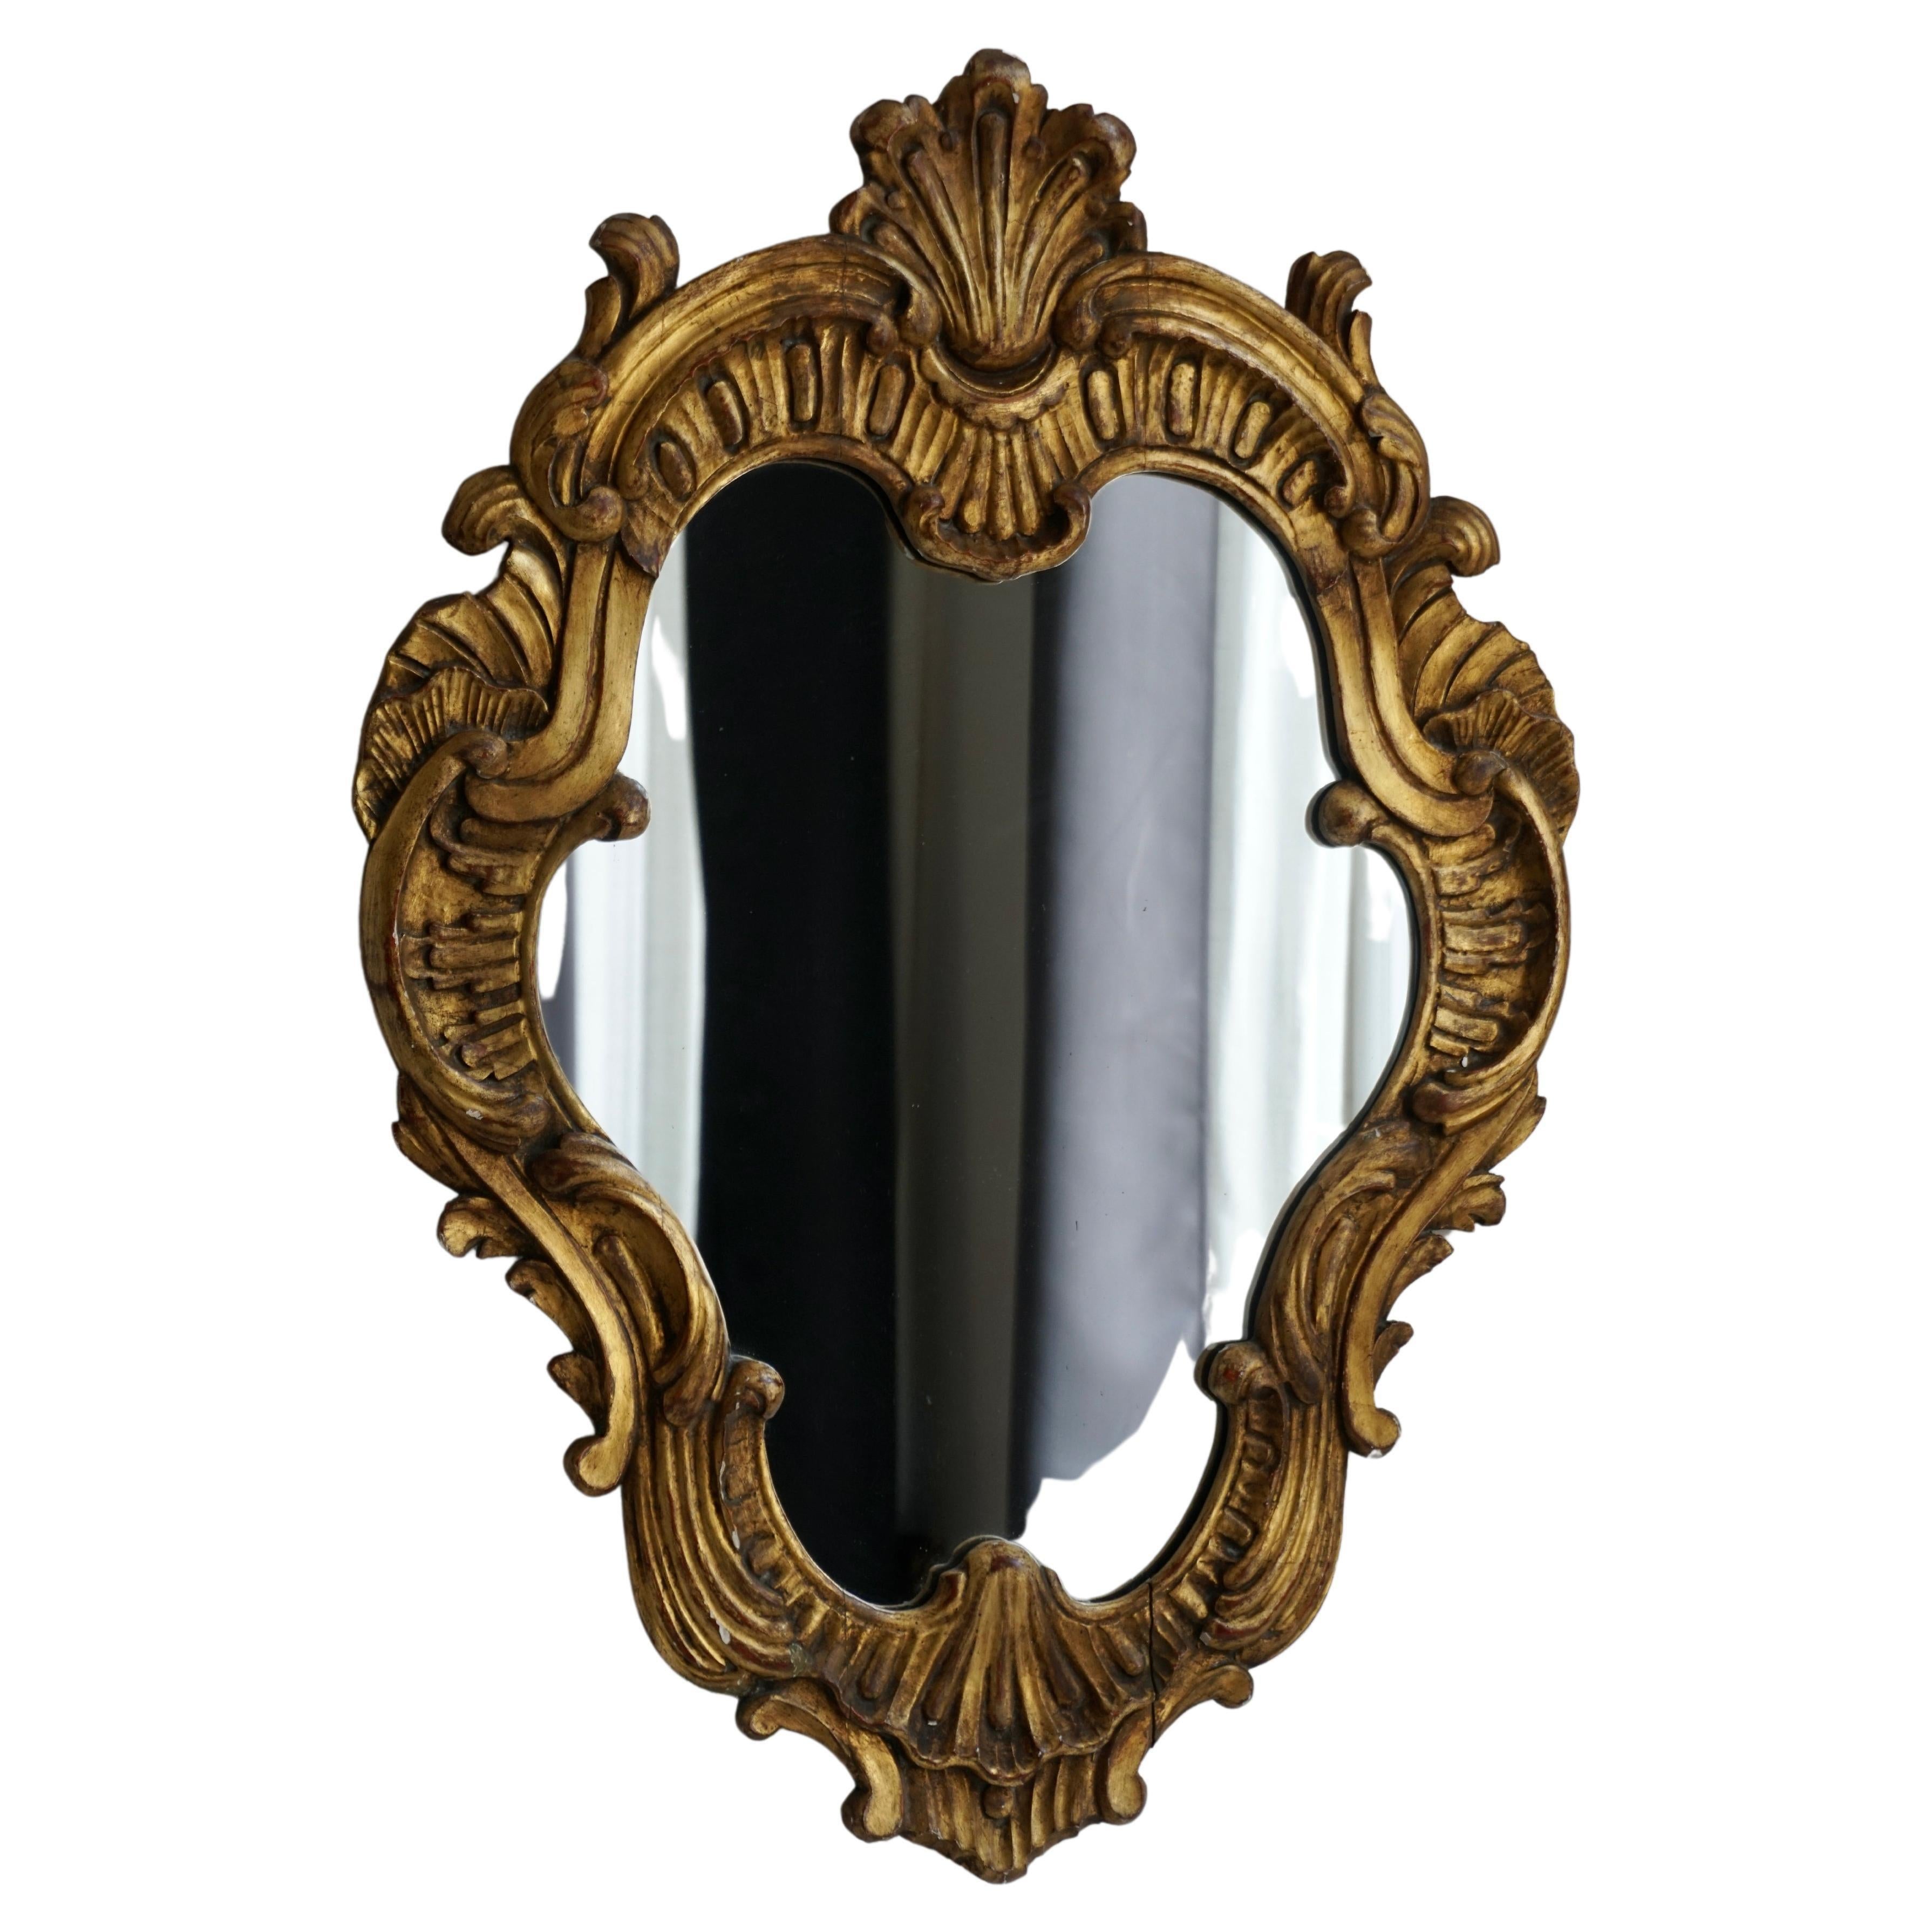 A gorgeous antique mid 20th century Italian Rococo style gilded wood mirror. This stunning mirror retains the original old mirror glass with an ornate scrolling leaf design and a lovely gilt patina.  

Dimensions; 21